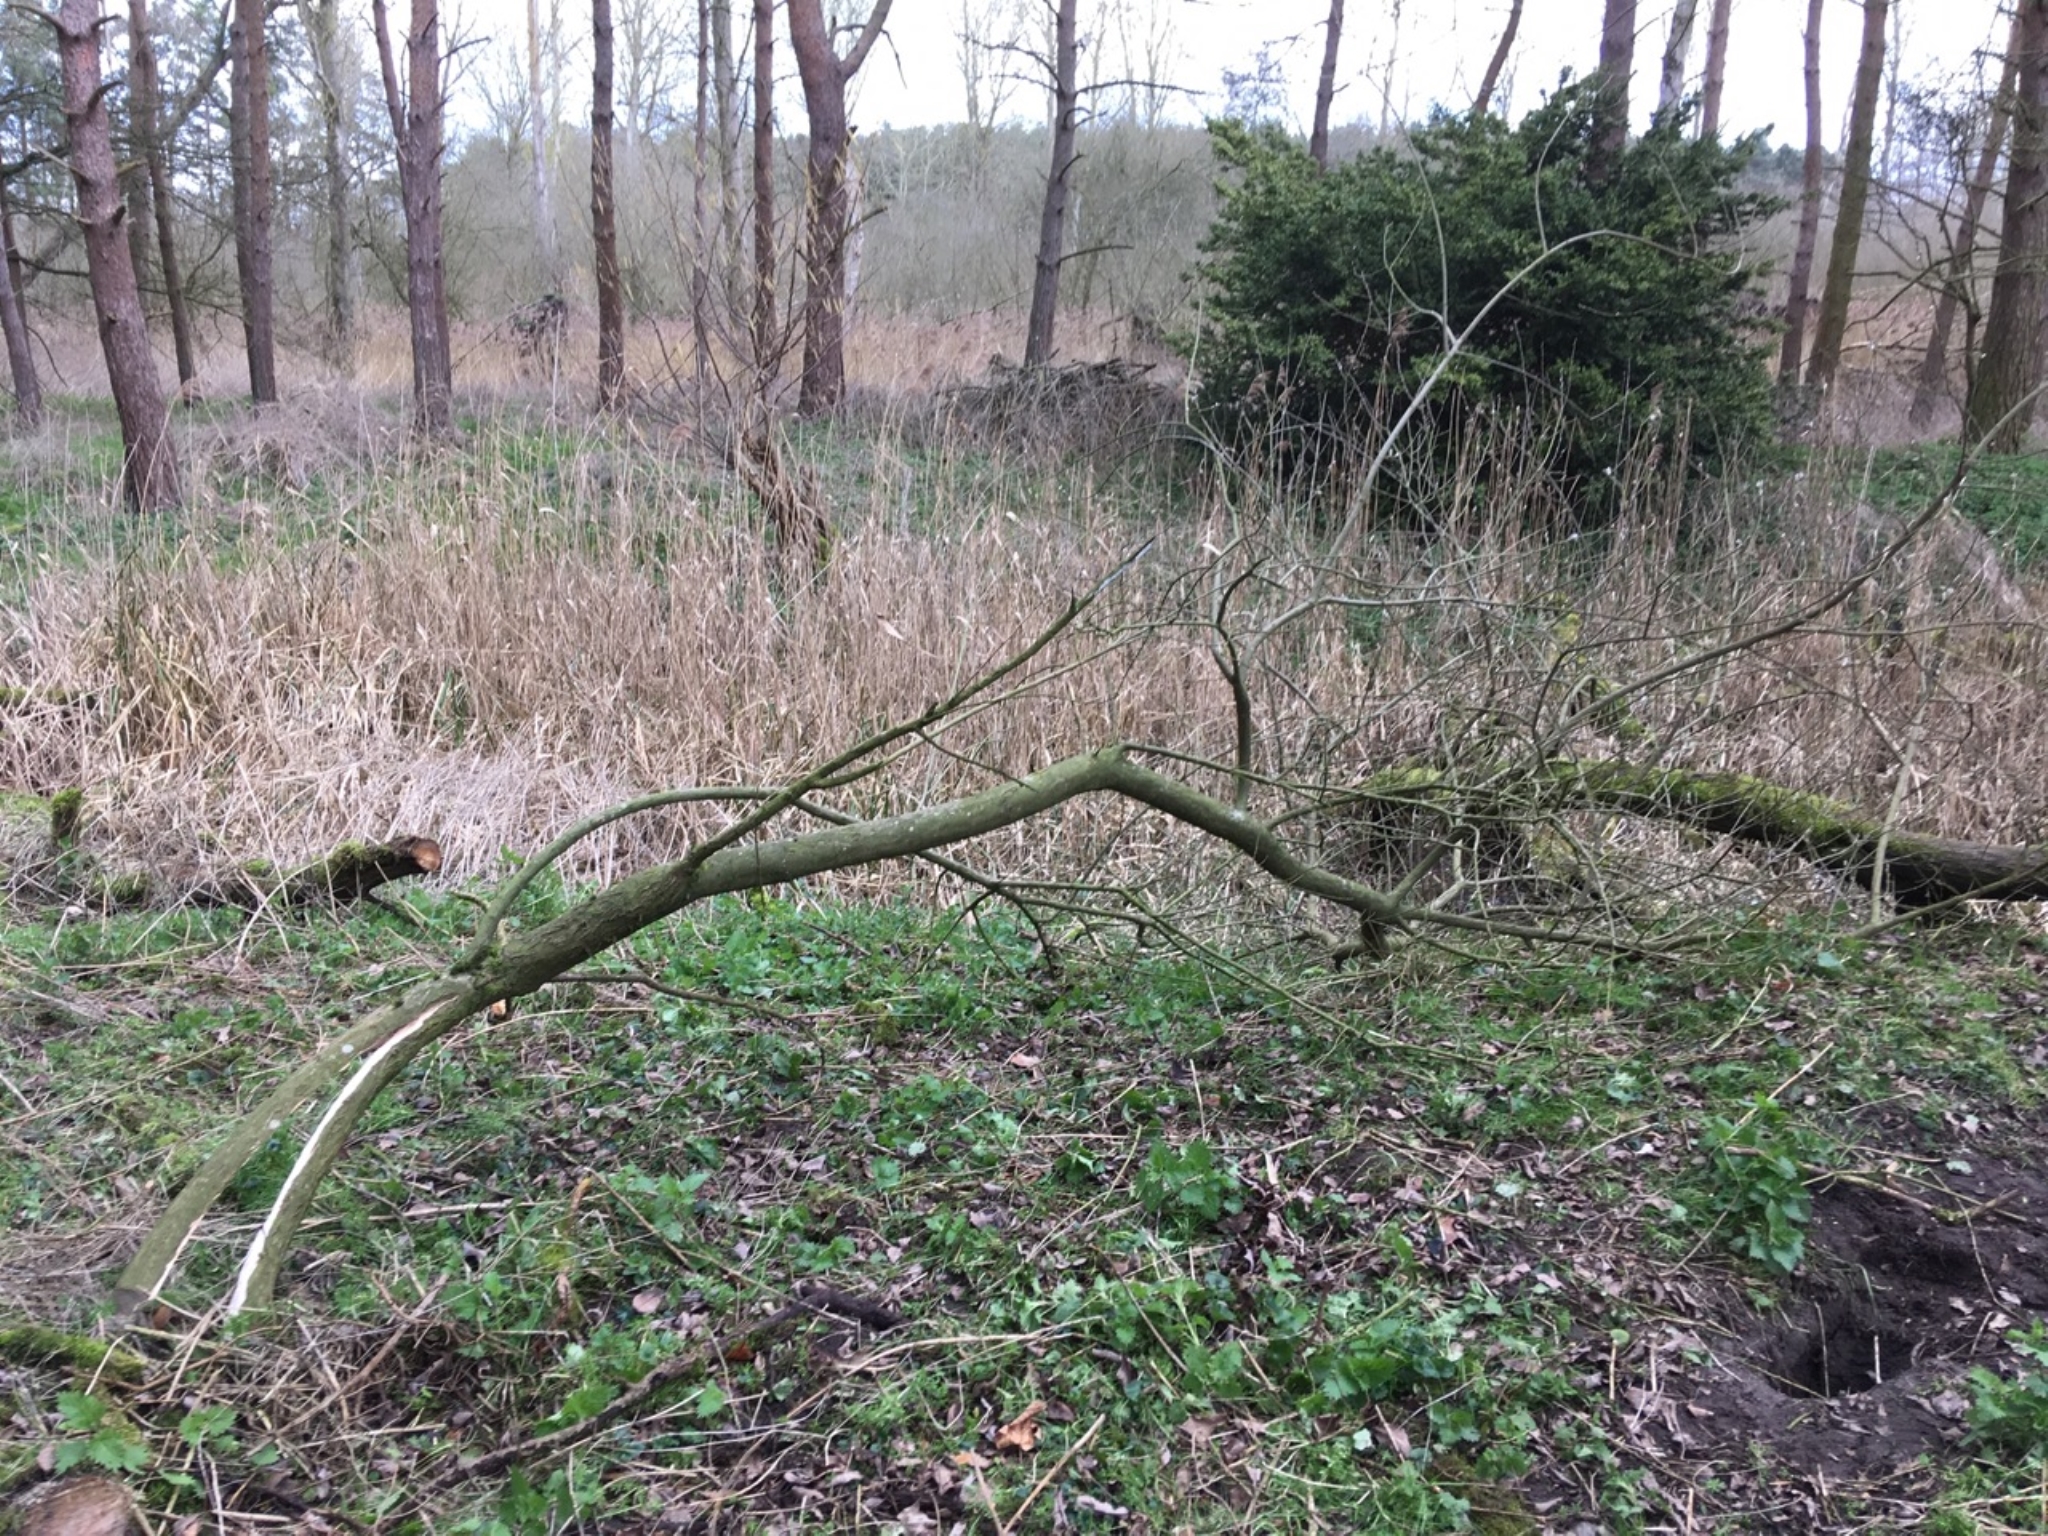 A photo from the FoTF Conservation Event - March 2019 - Clearance work around, and in, the ponds at Harling Woods, Harling : The reamins of a fallen trees